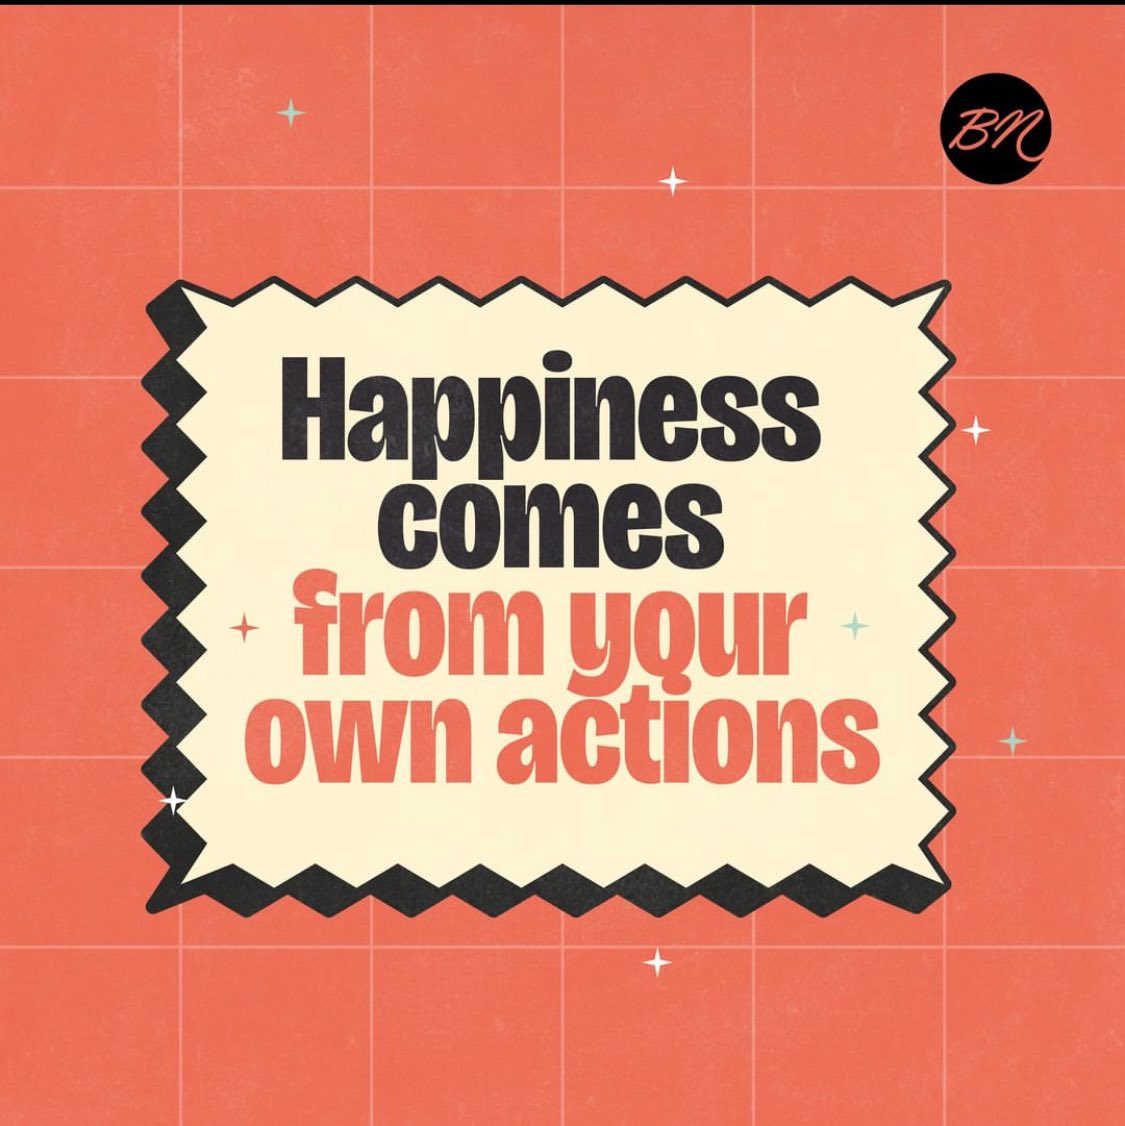 Act it. Own it. Feel it. Happiness comes from your actions. Good morning, BNers.